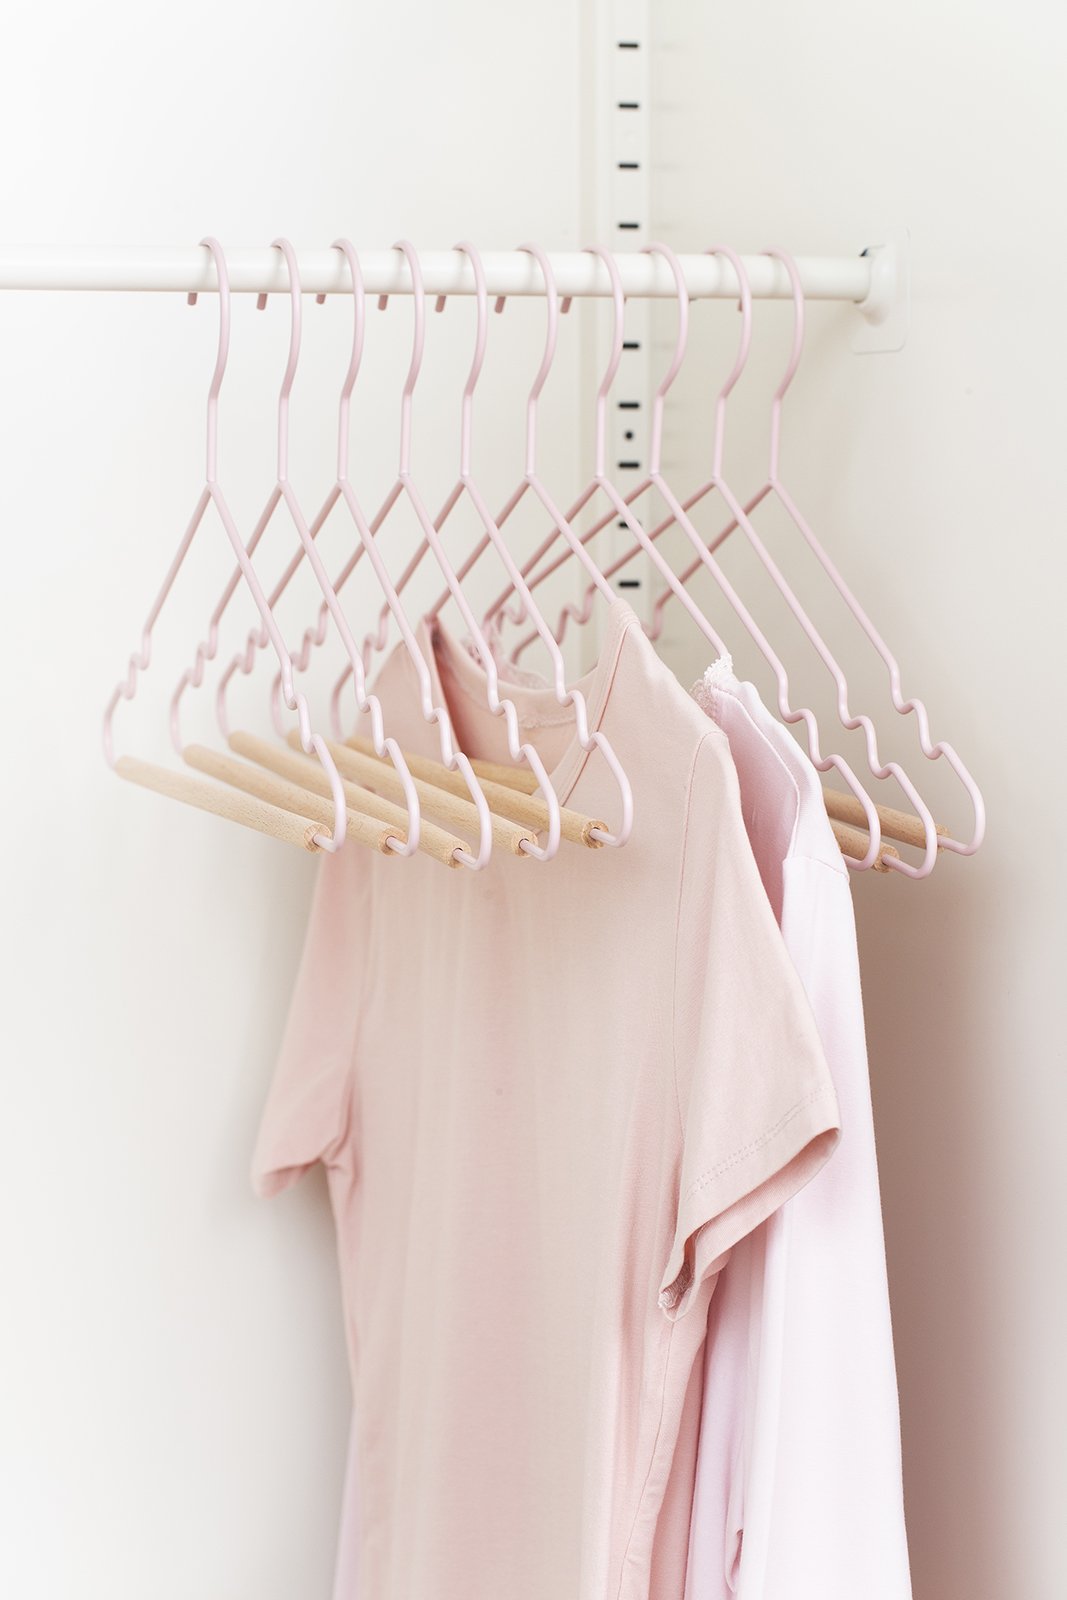 Mustard Made Adult Top Hangers in Blush Pack of 10